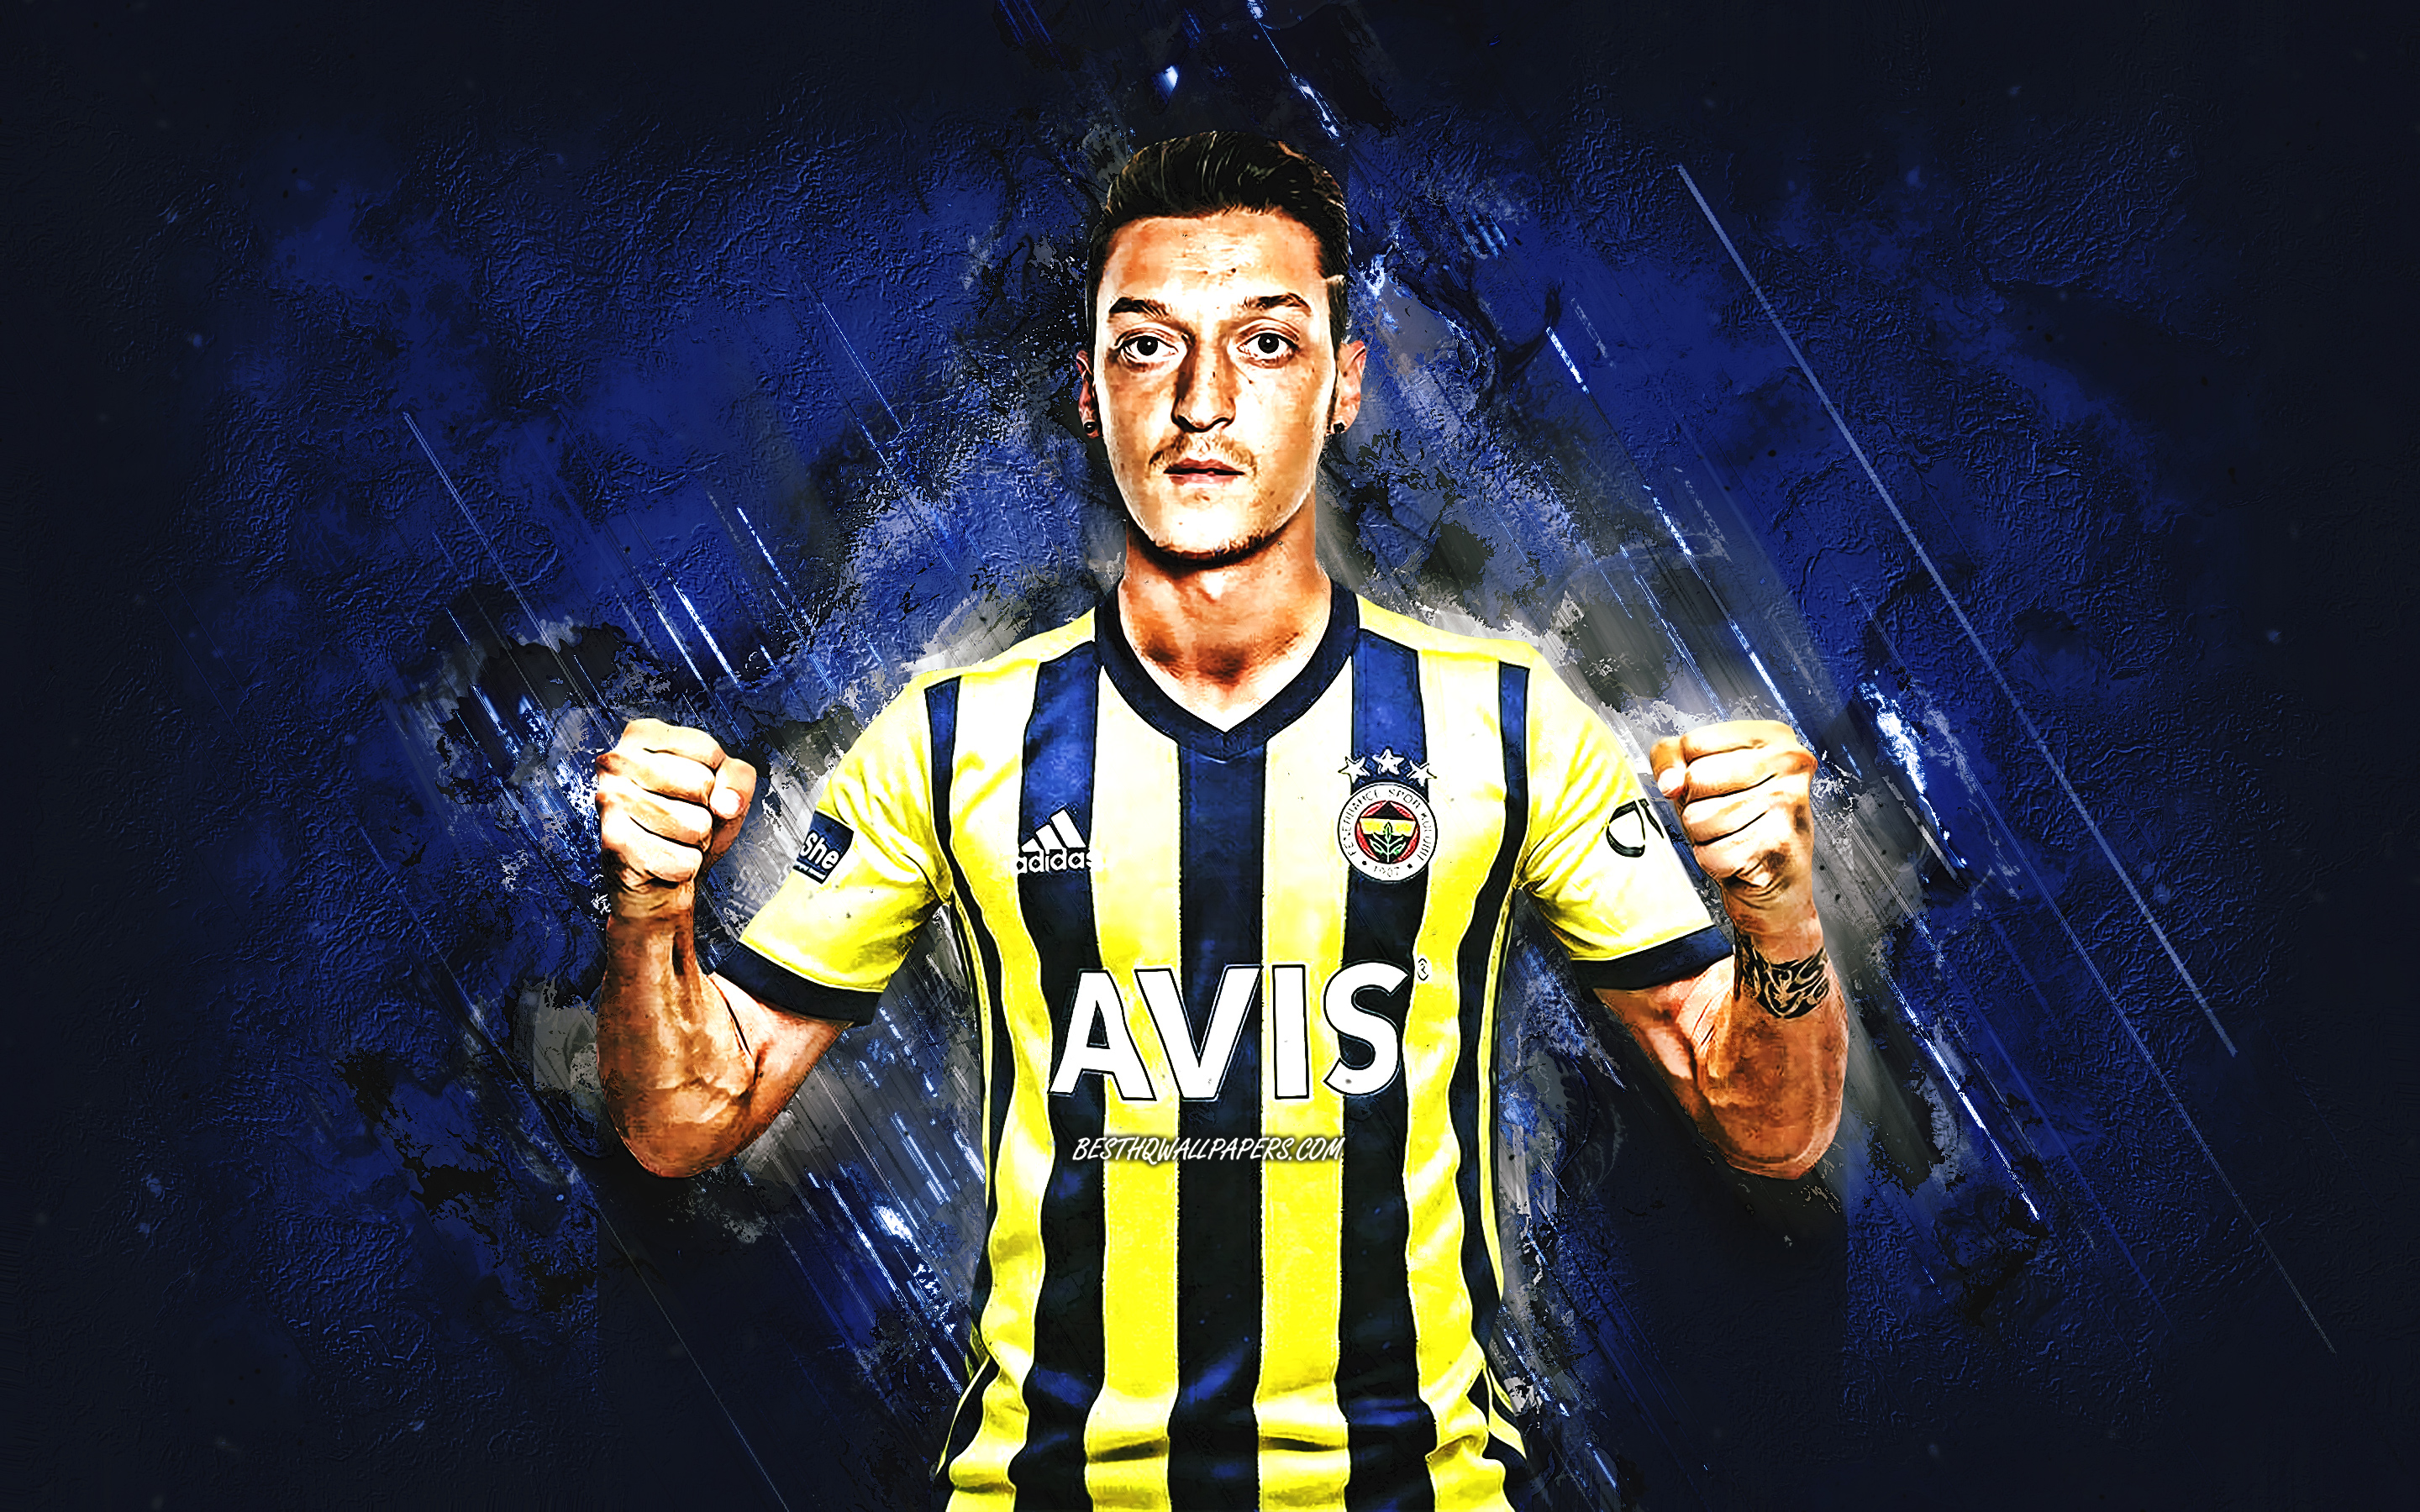 Download wallpaper Mesut Ozil, Fenerbahce, German footballer, portrait, blue stone background, soccer for desktop with resolution 2880x1800. High Quality HD picture wallpaper